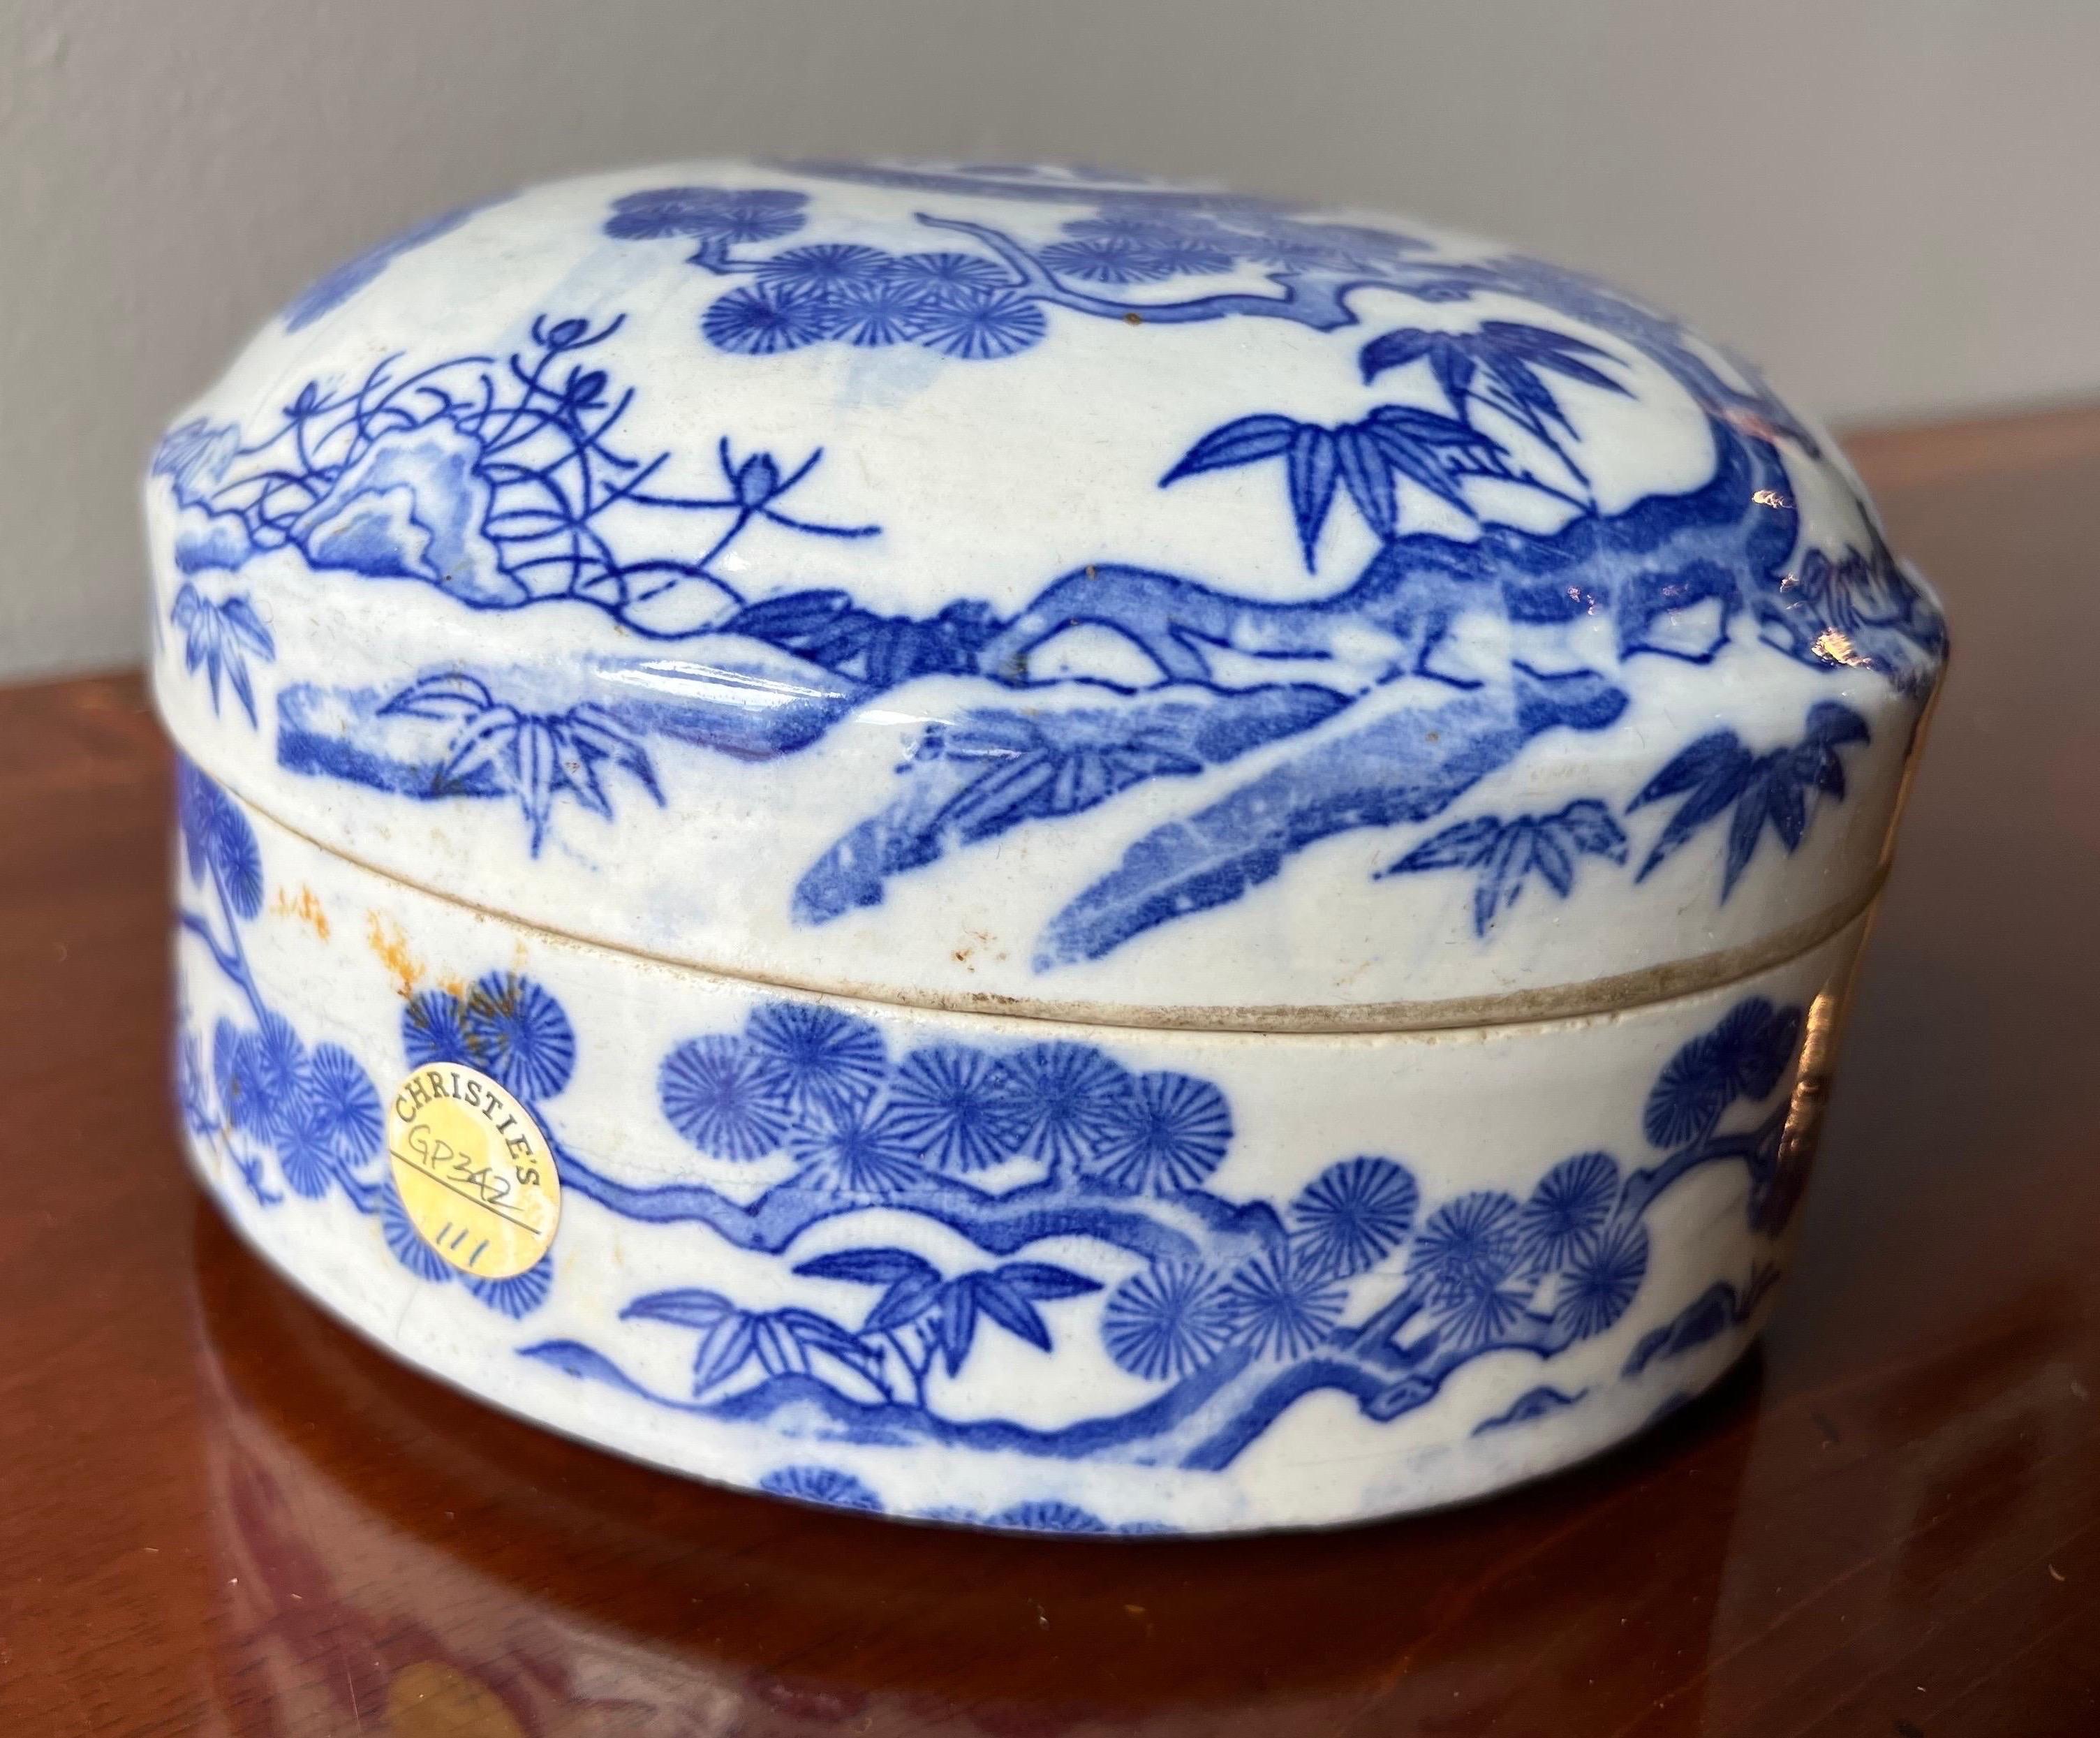 18th- early 20th century Chinese blue and white lidded bowl with Christie’s stickers. Pre 1911 given no country of origin label.